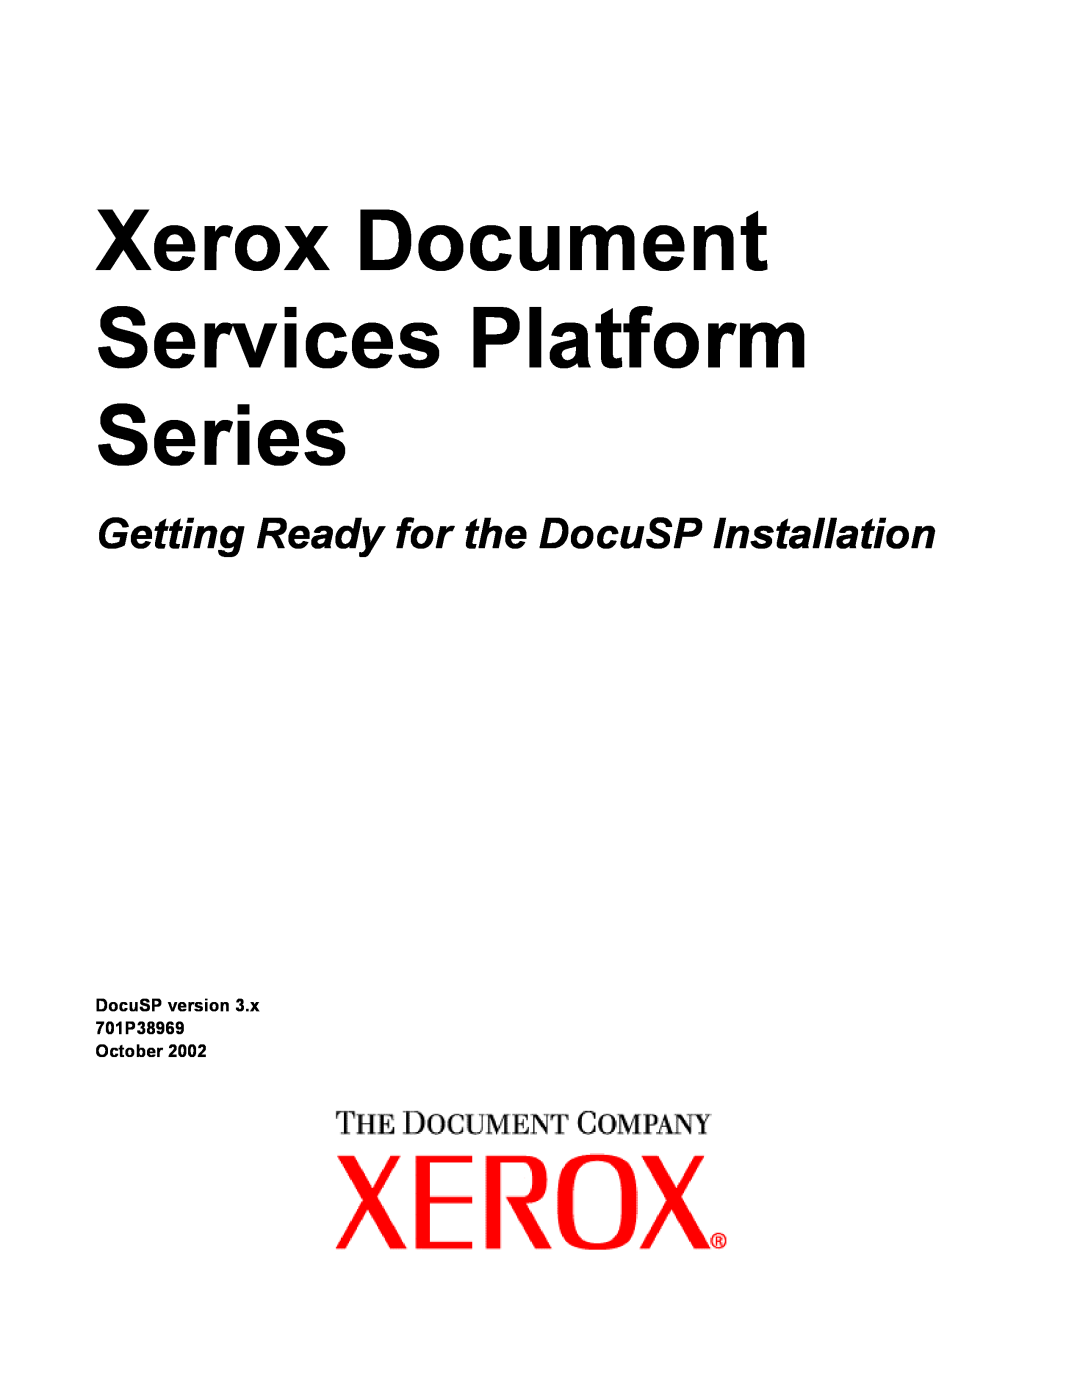 Xerox 701P38969 manual Xerox Document Services Platform Series, Getting Ready for the DocuSP Installation 